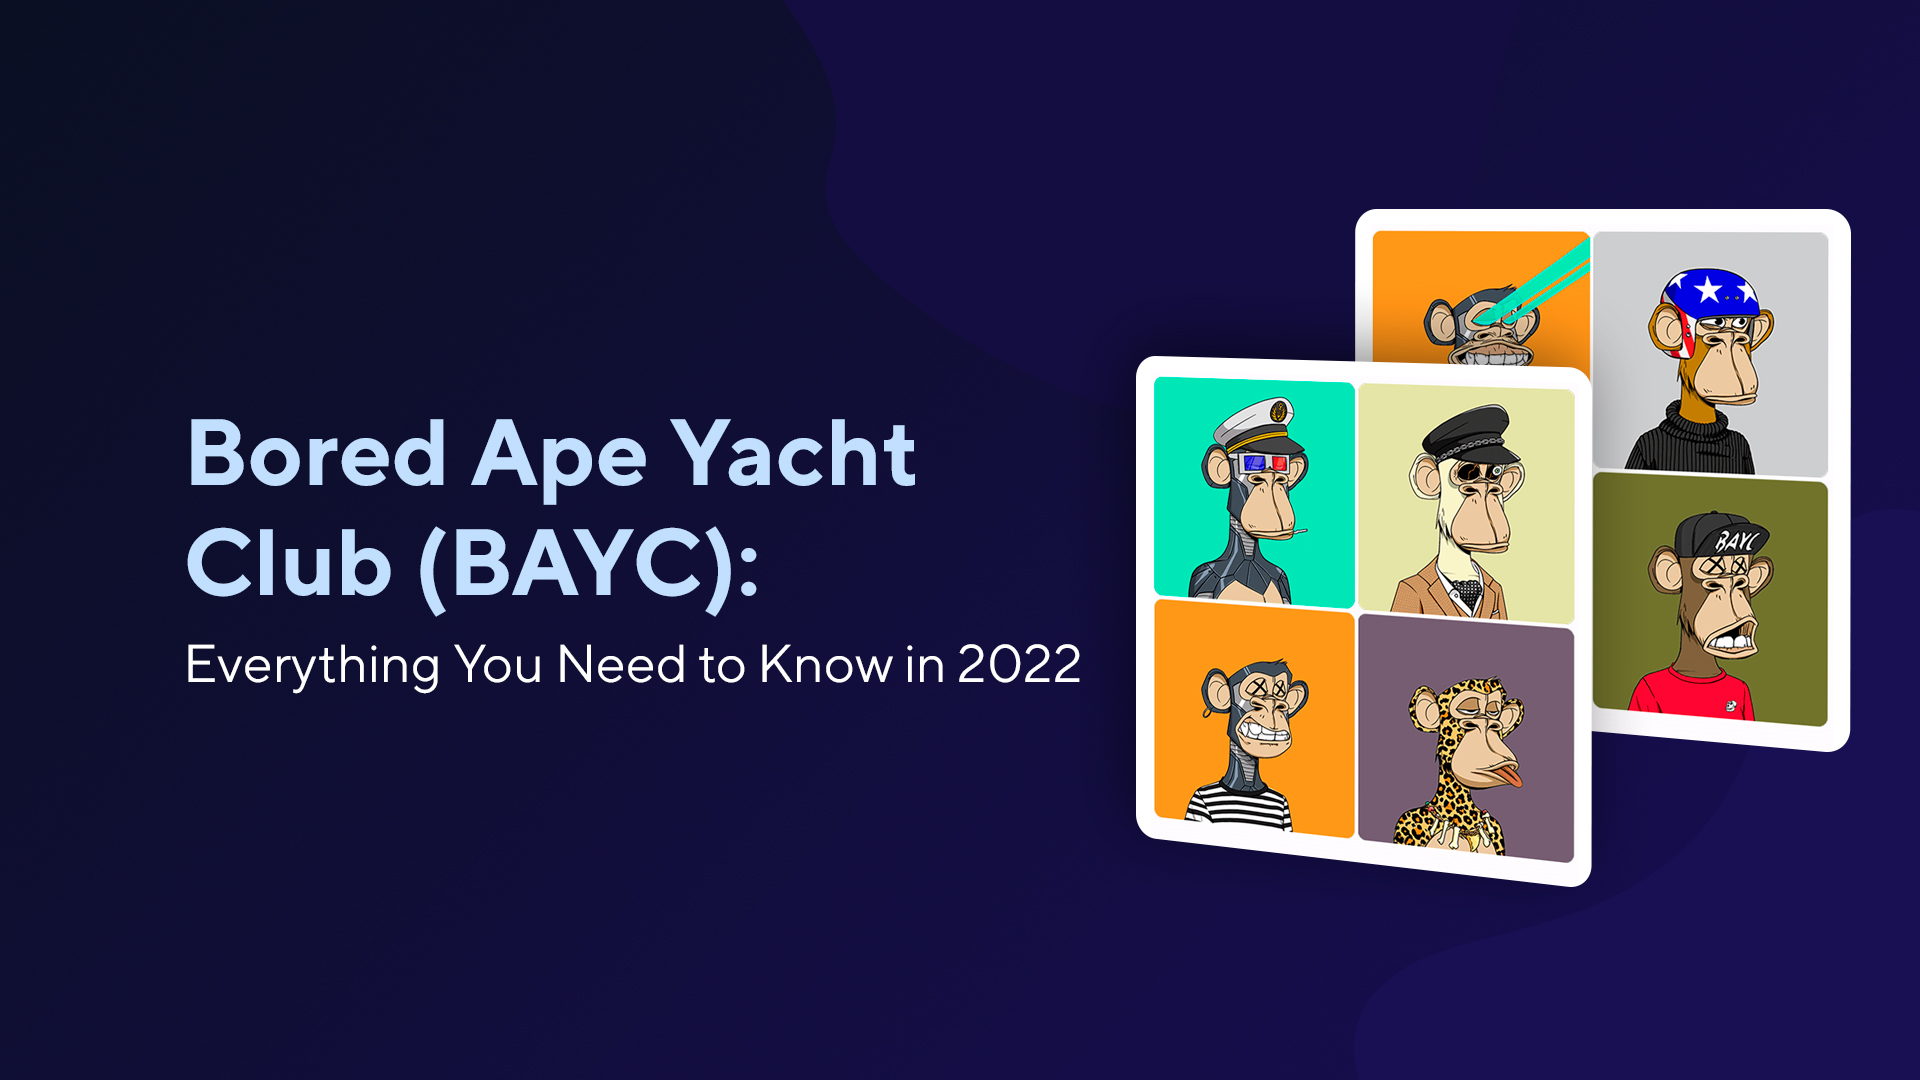 Bored Ape Yacht Club (BAYC): Everything You Need to Know in 2022